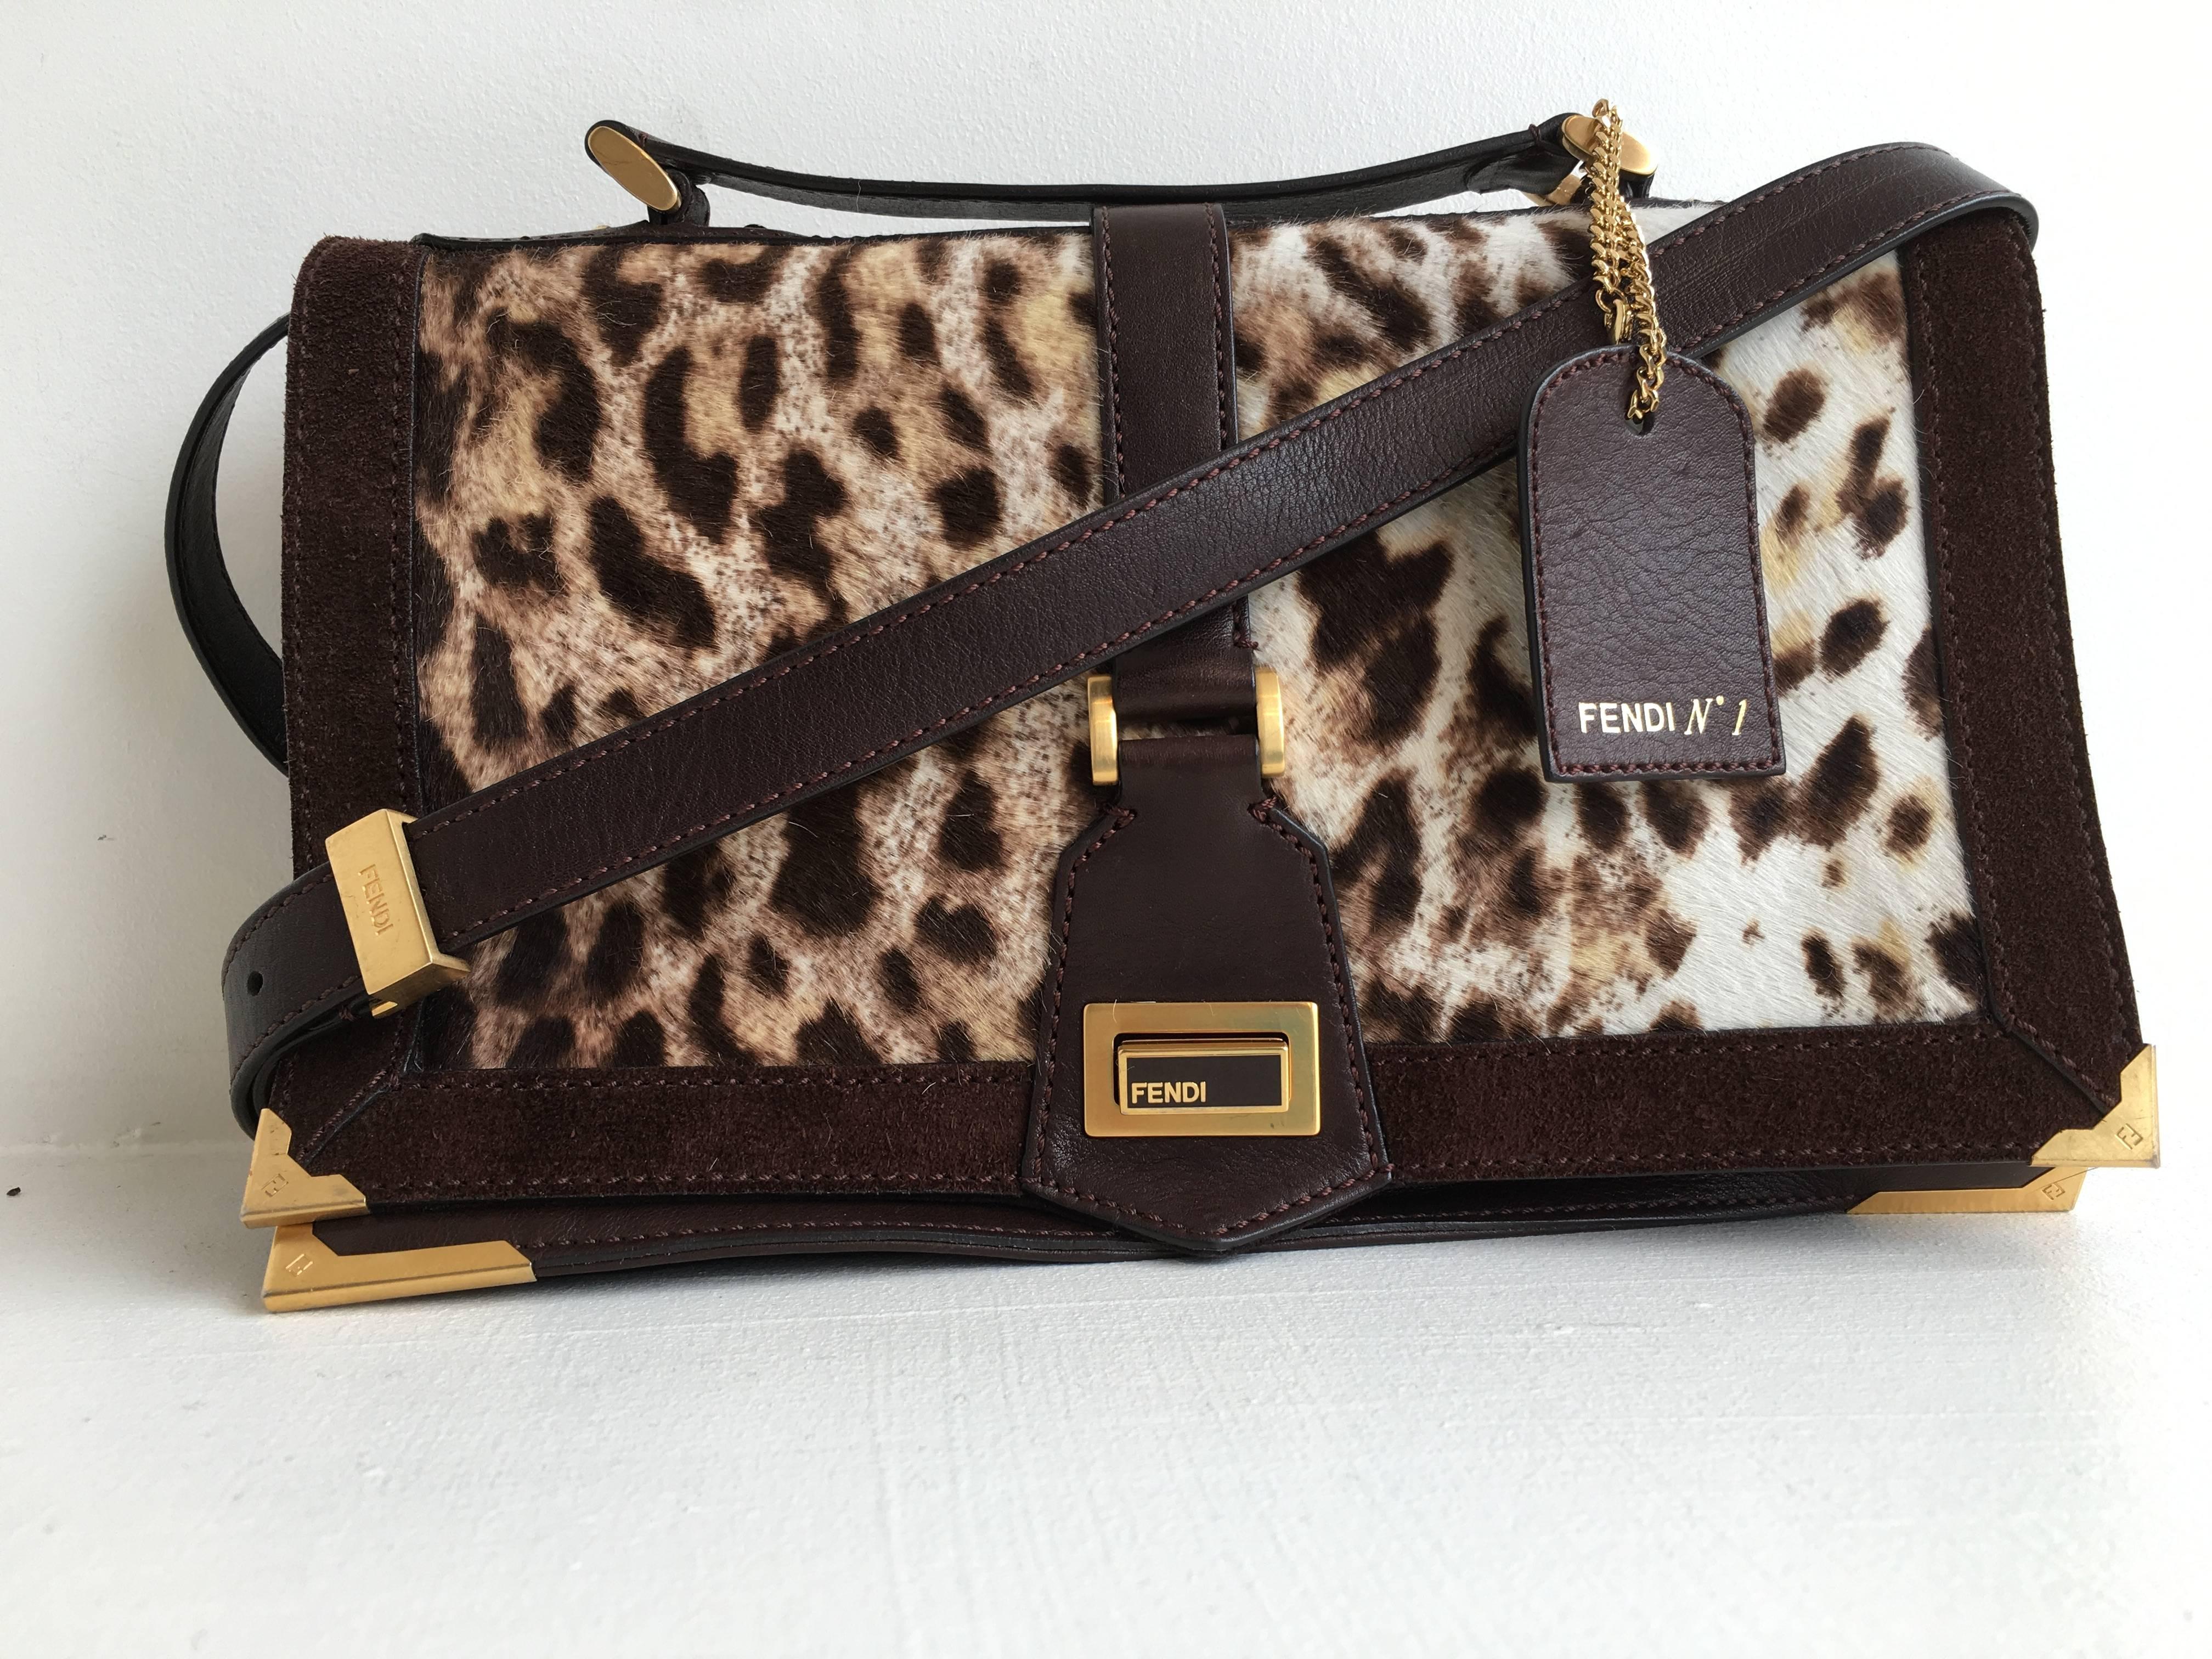 Fendi No.1 crossbody bag in leopard print haircalf with brown leather siding and brown suede border. Each corner is sealed with gold tone metal engraved with the double F logo.
The inside of the bag features two fabric lined main compartments, with